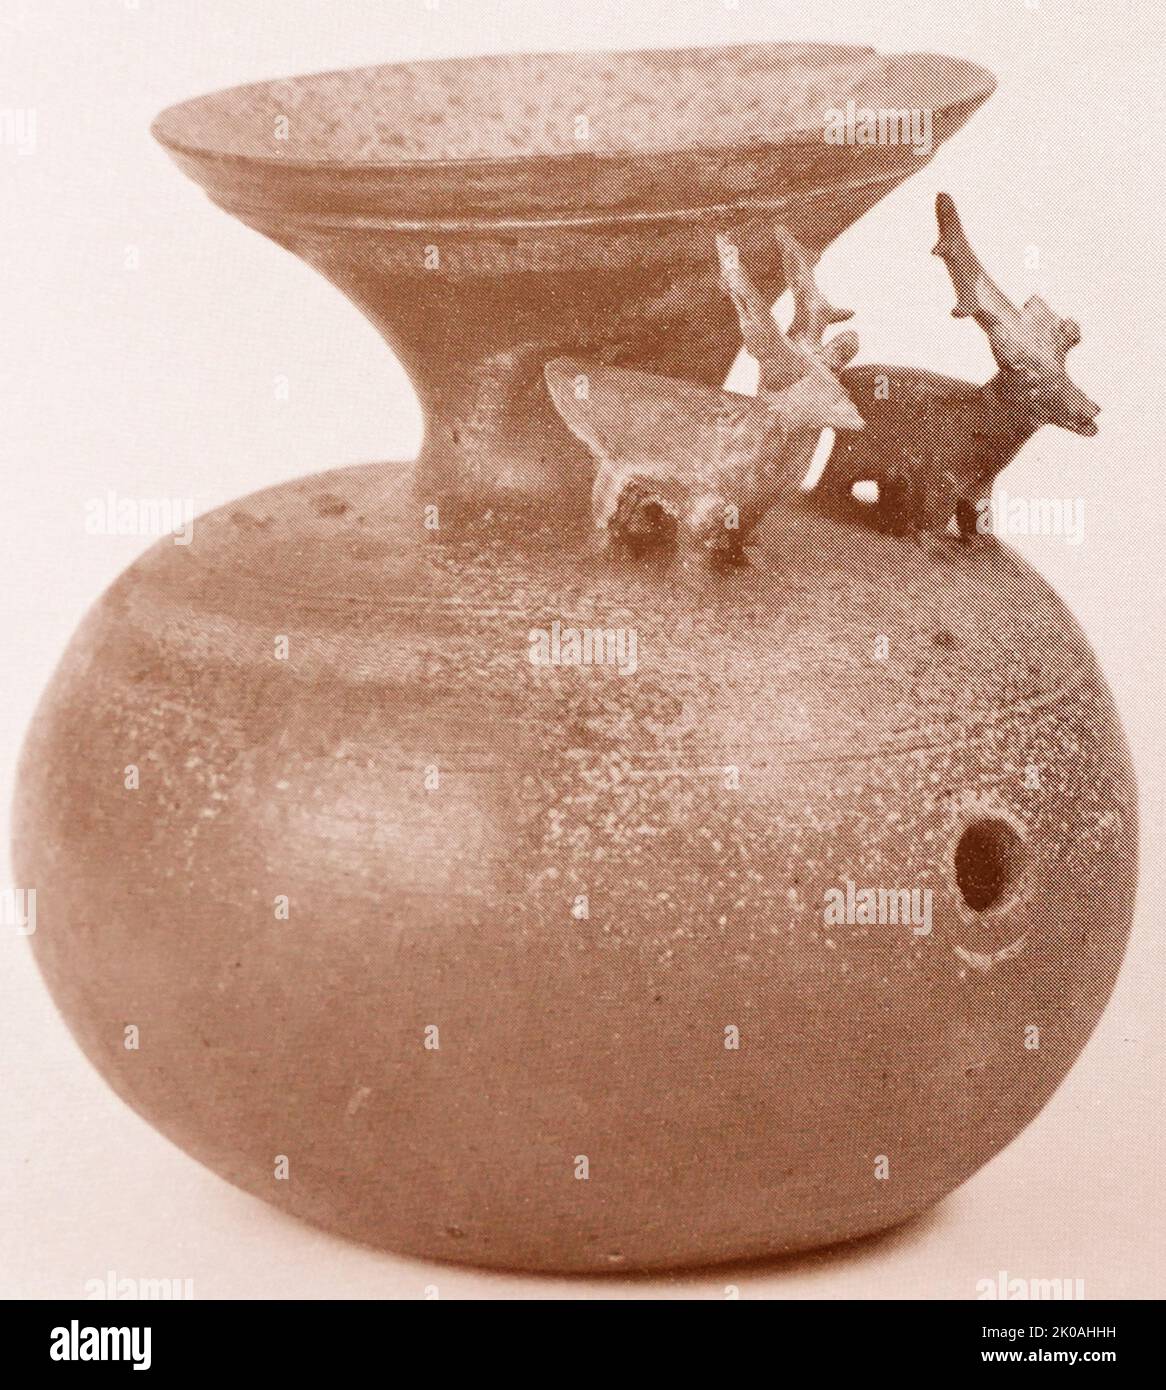 Jar with Deer from 5th6th century Three Kingdoms Period of Korea Stock Photo